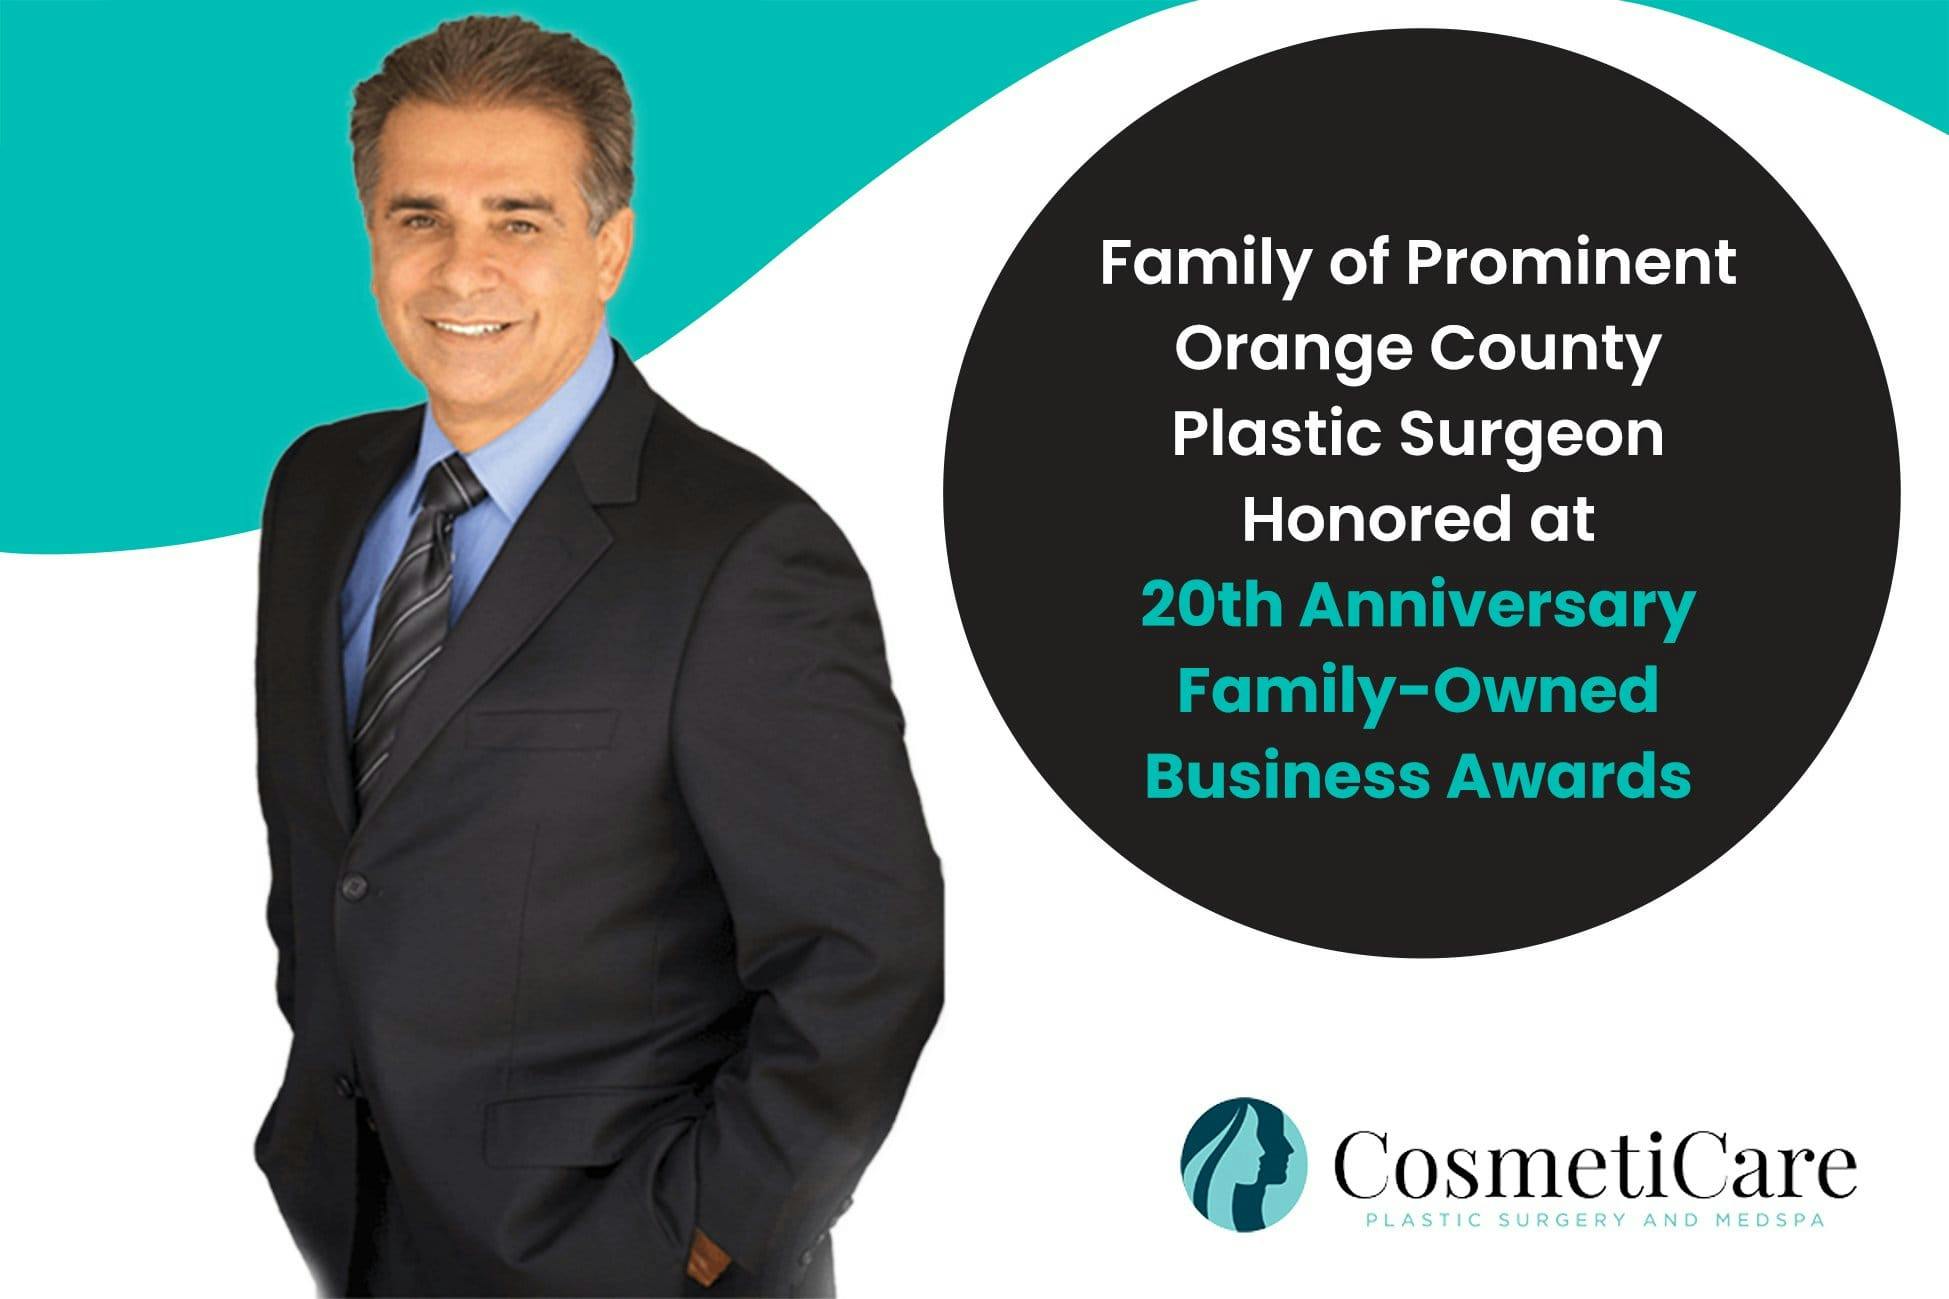 Family of Prominent Orange County Plastic Surgeon Honored at 20th Anniversary Family-Owned Business Awards